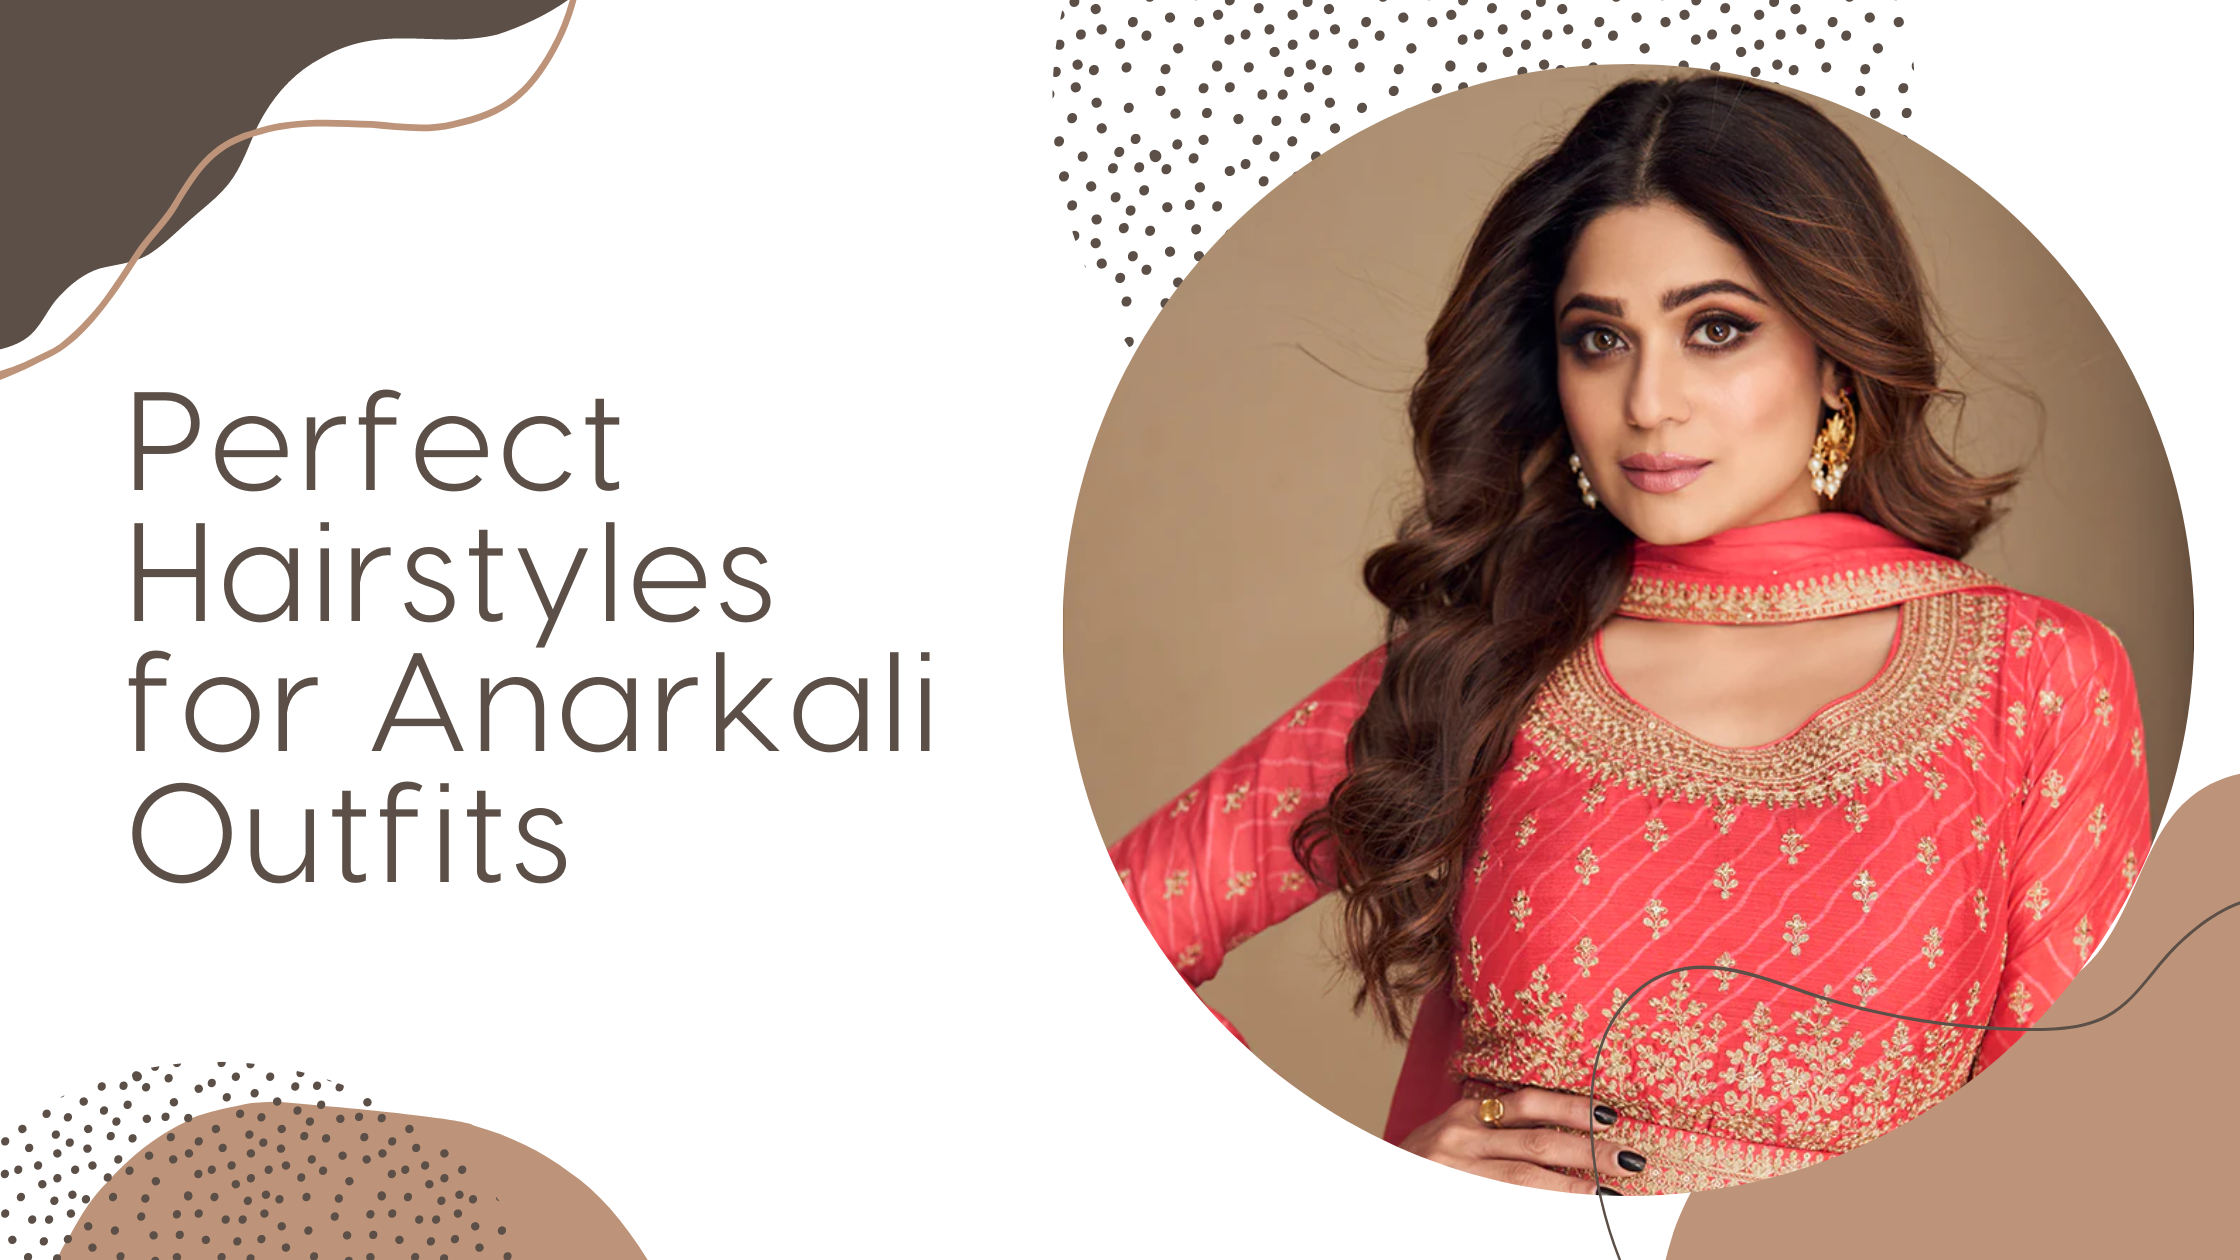 Finding the Perfect Hairstyle to Complement an Anarkali Outfit